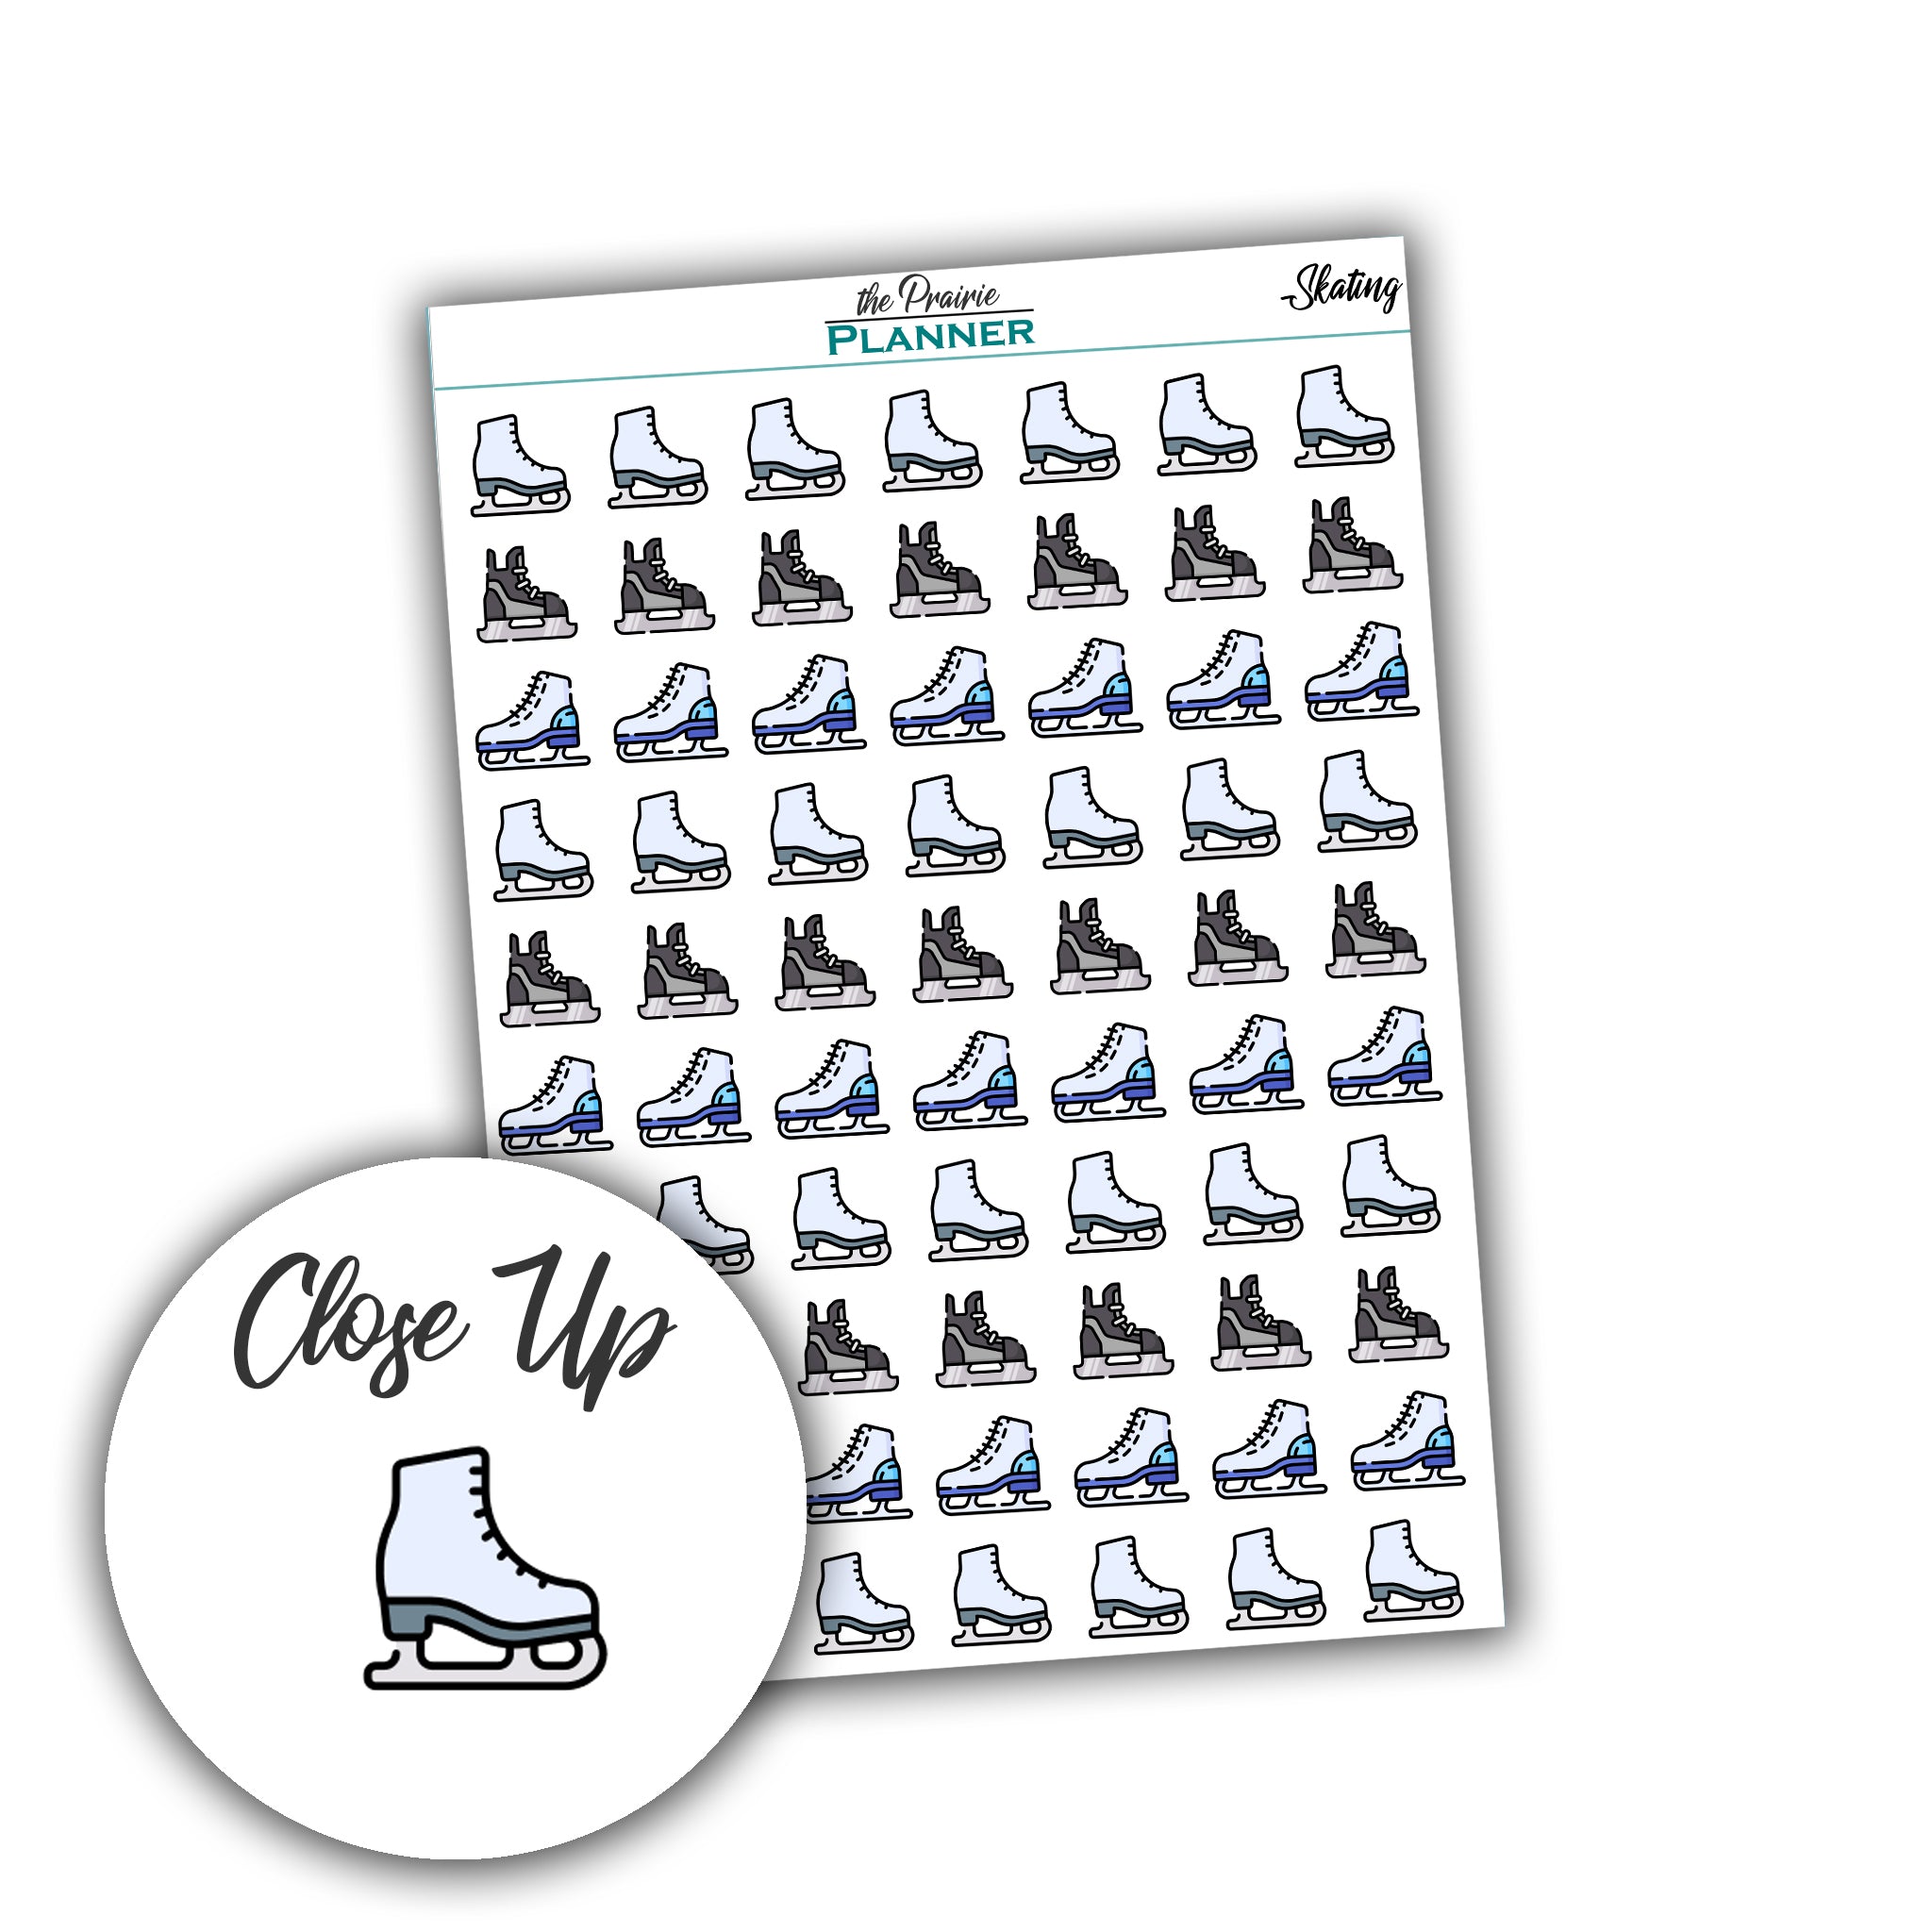 Skating - Planner Stickers